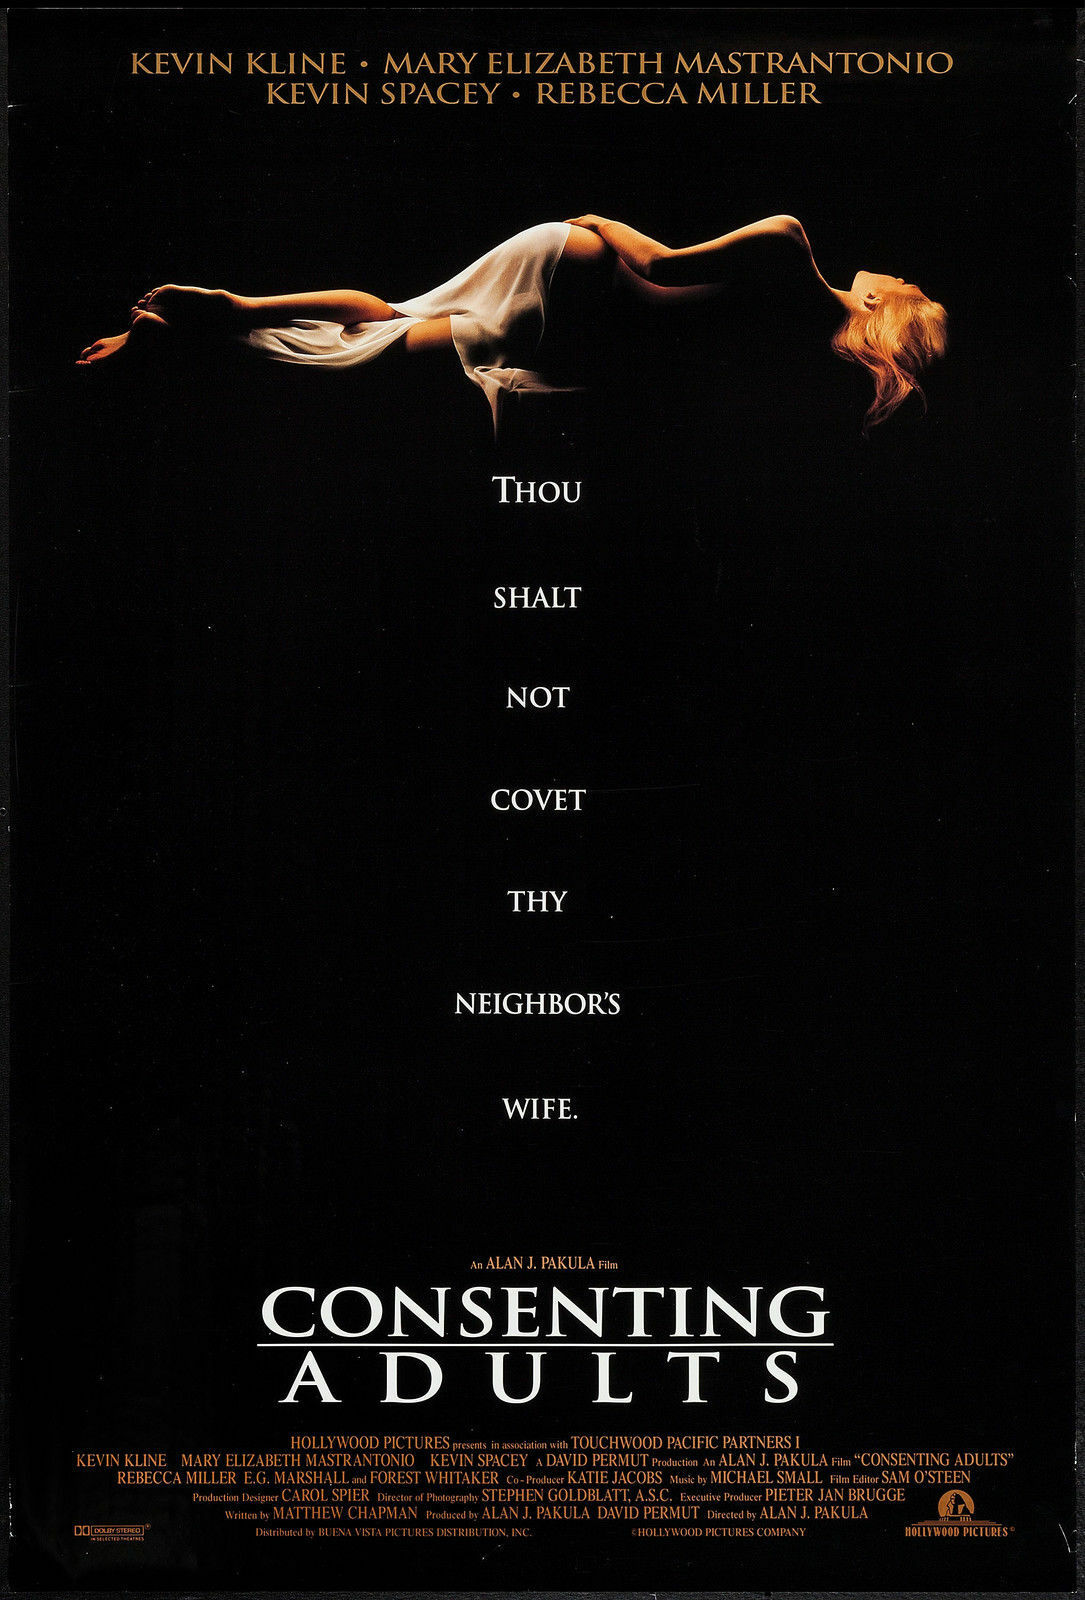 CONSENTING ADULTS